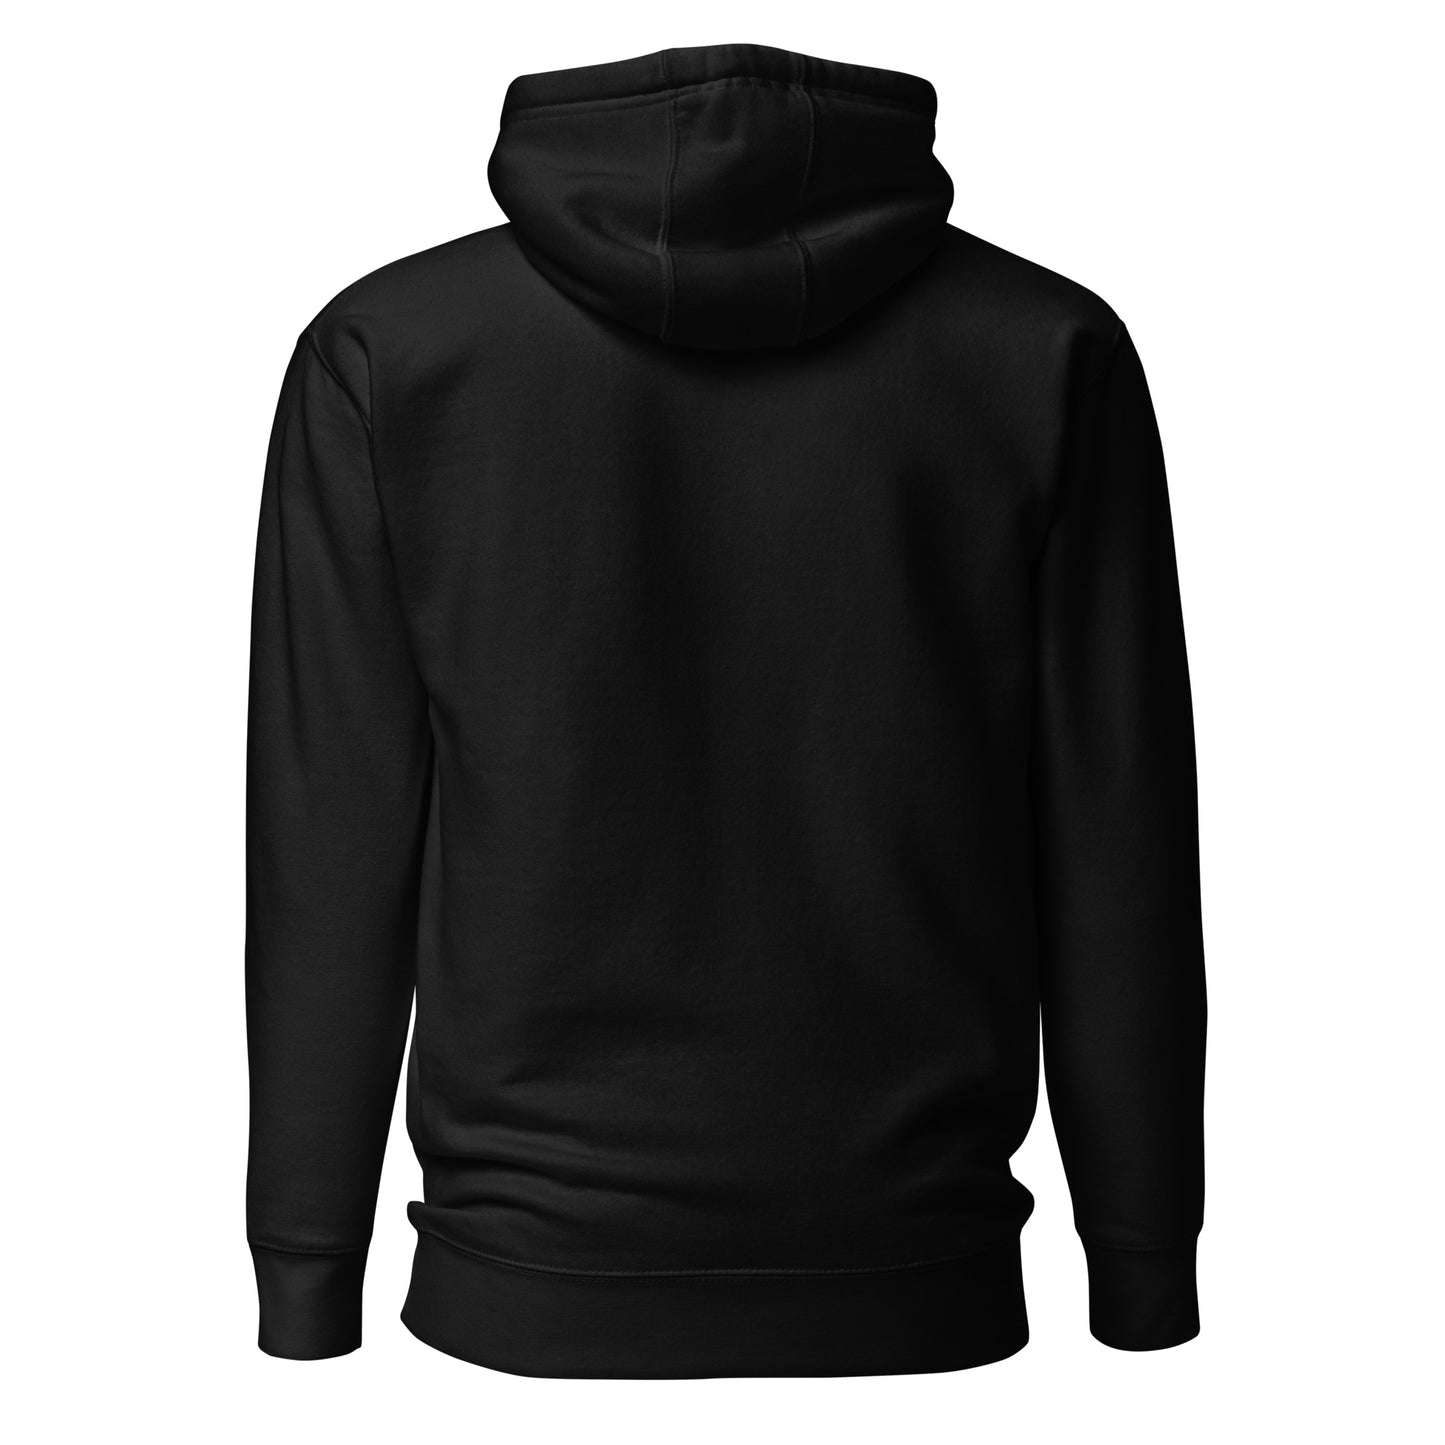 Not all ex's are bad - bestickter Hoodie